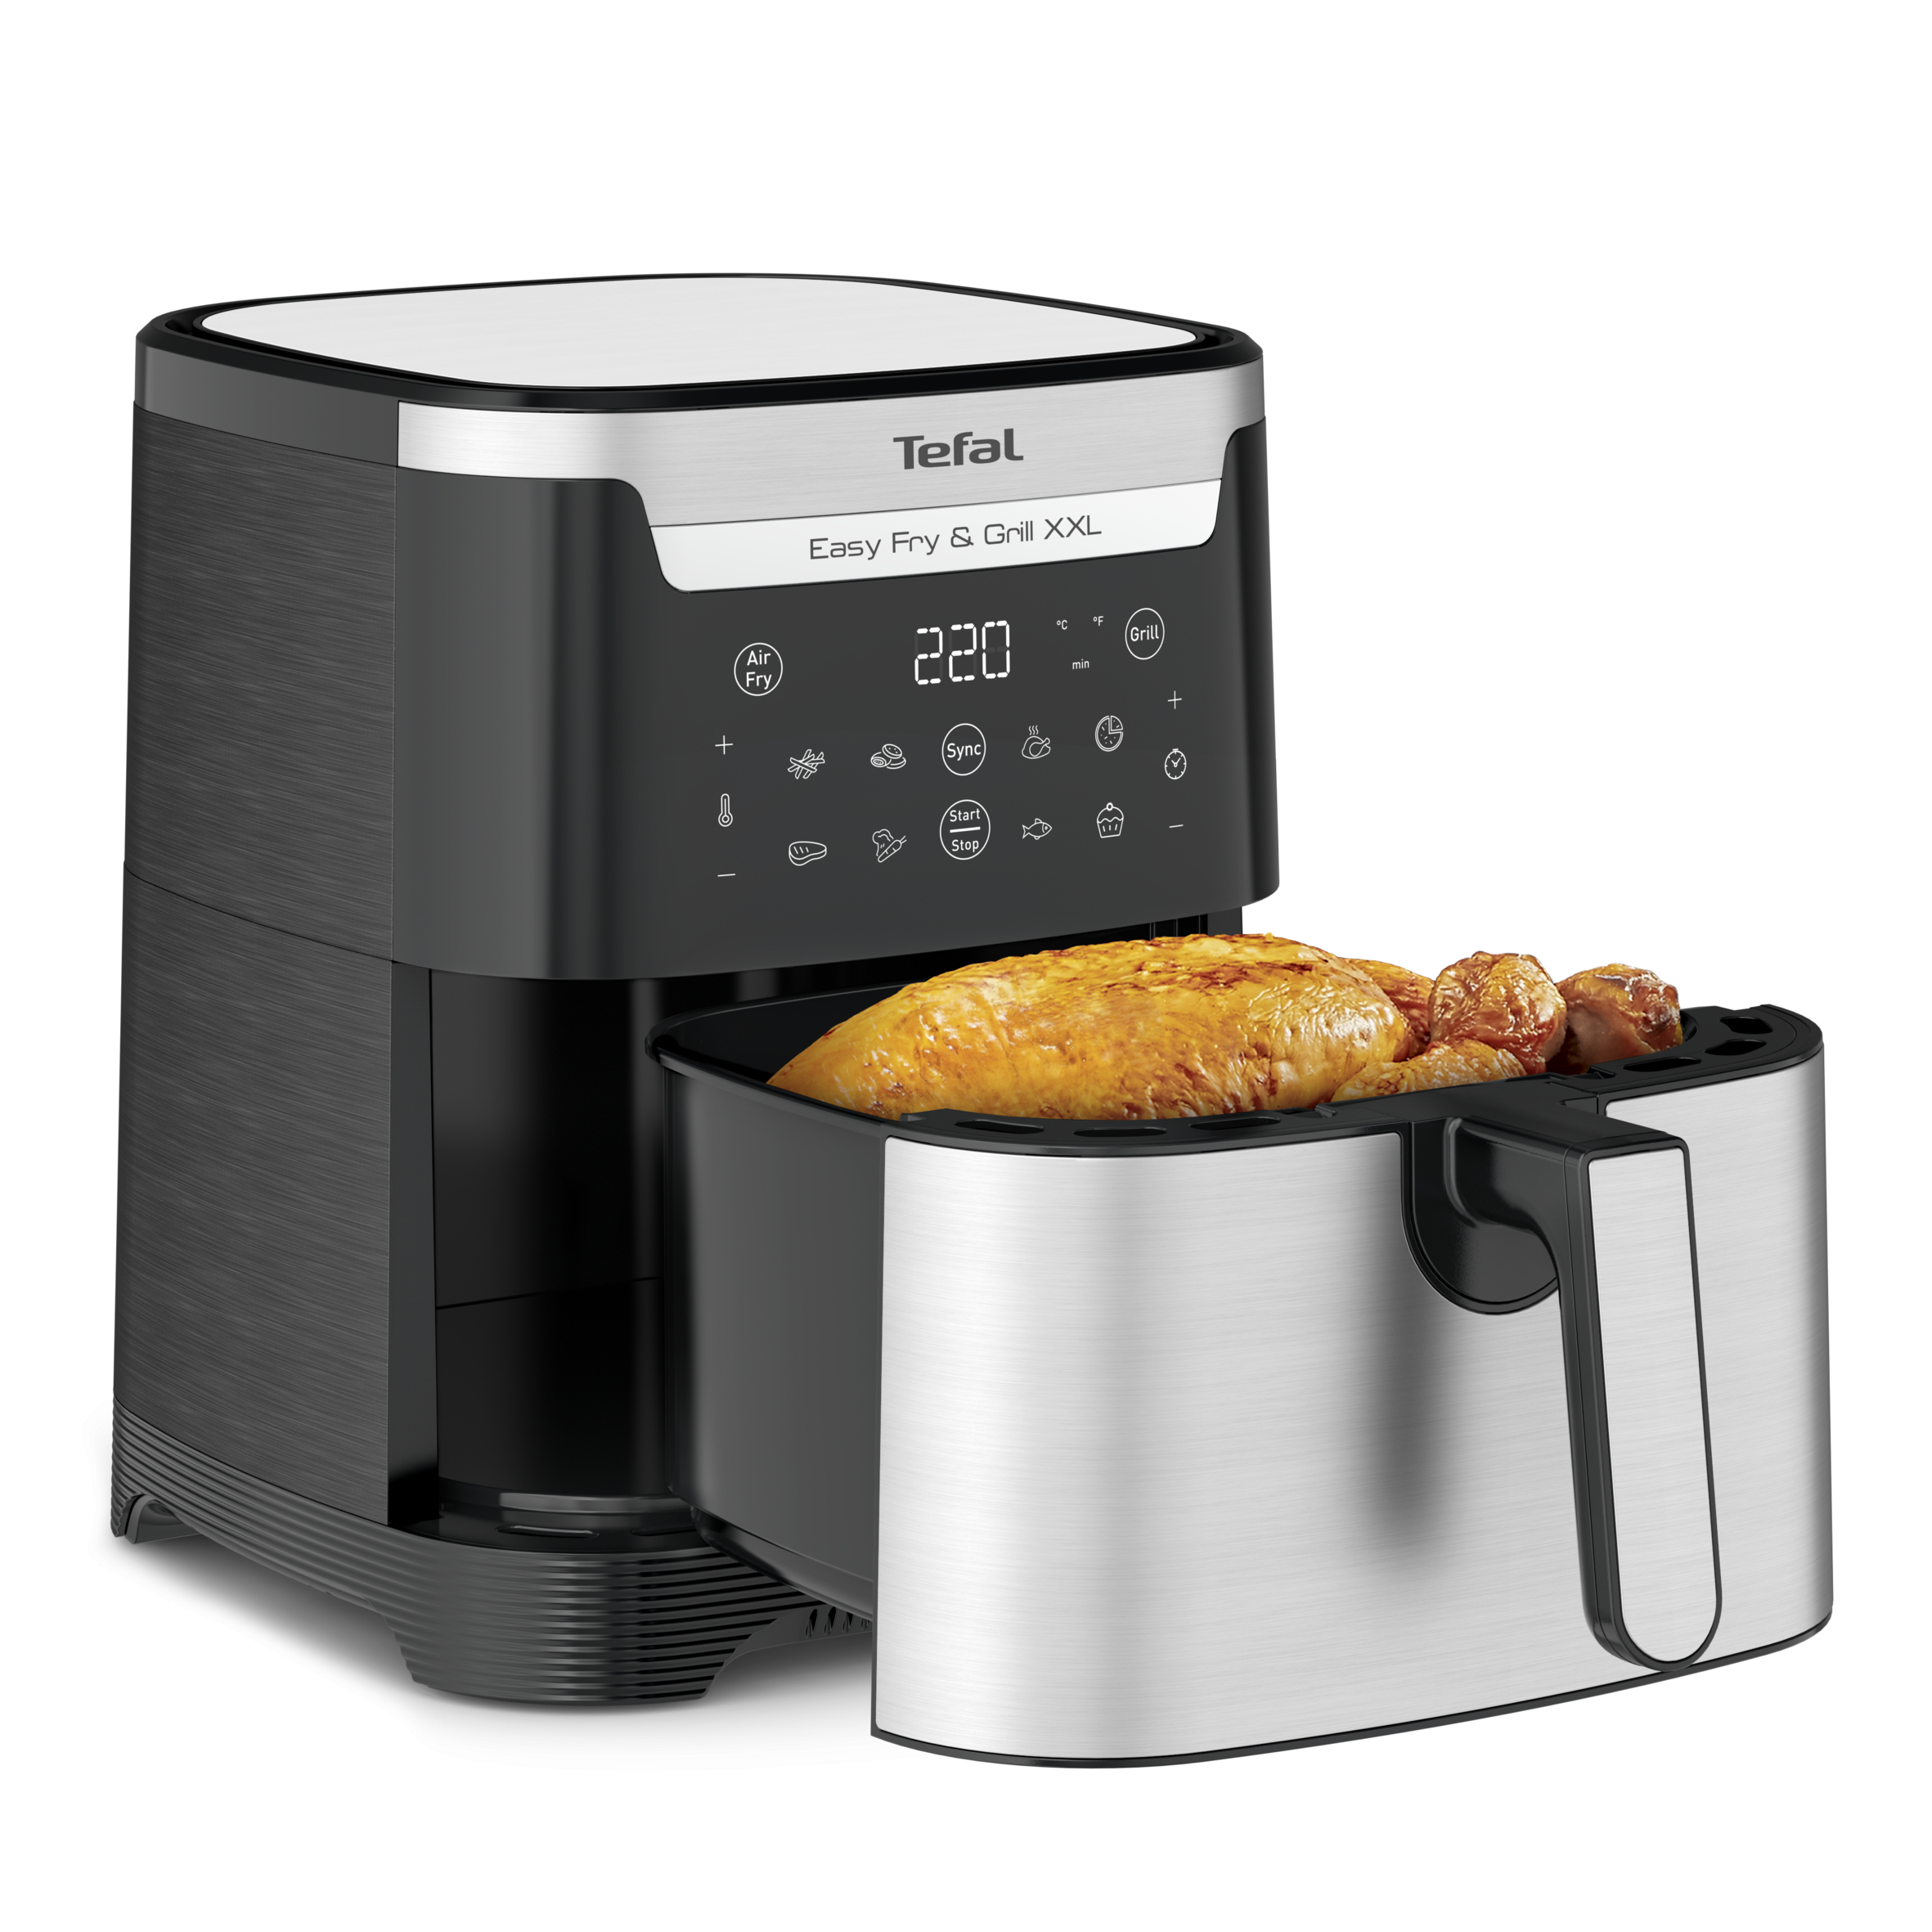 TEFAL Heissluft-Fritteuse Easy Fry & Grill XXL 1.5 kg